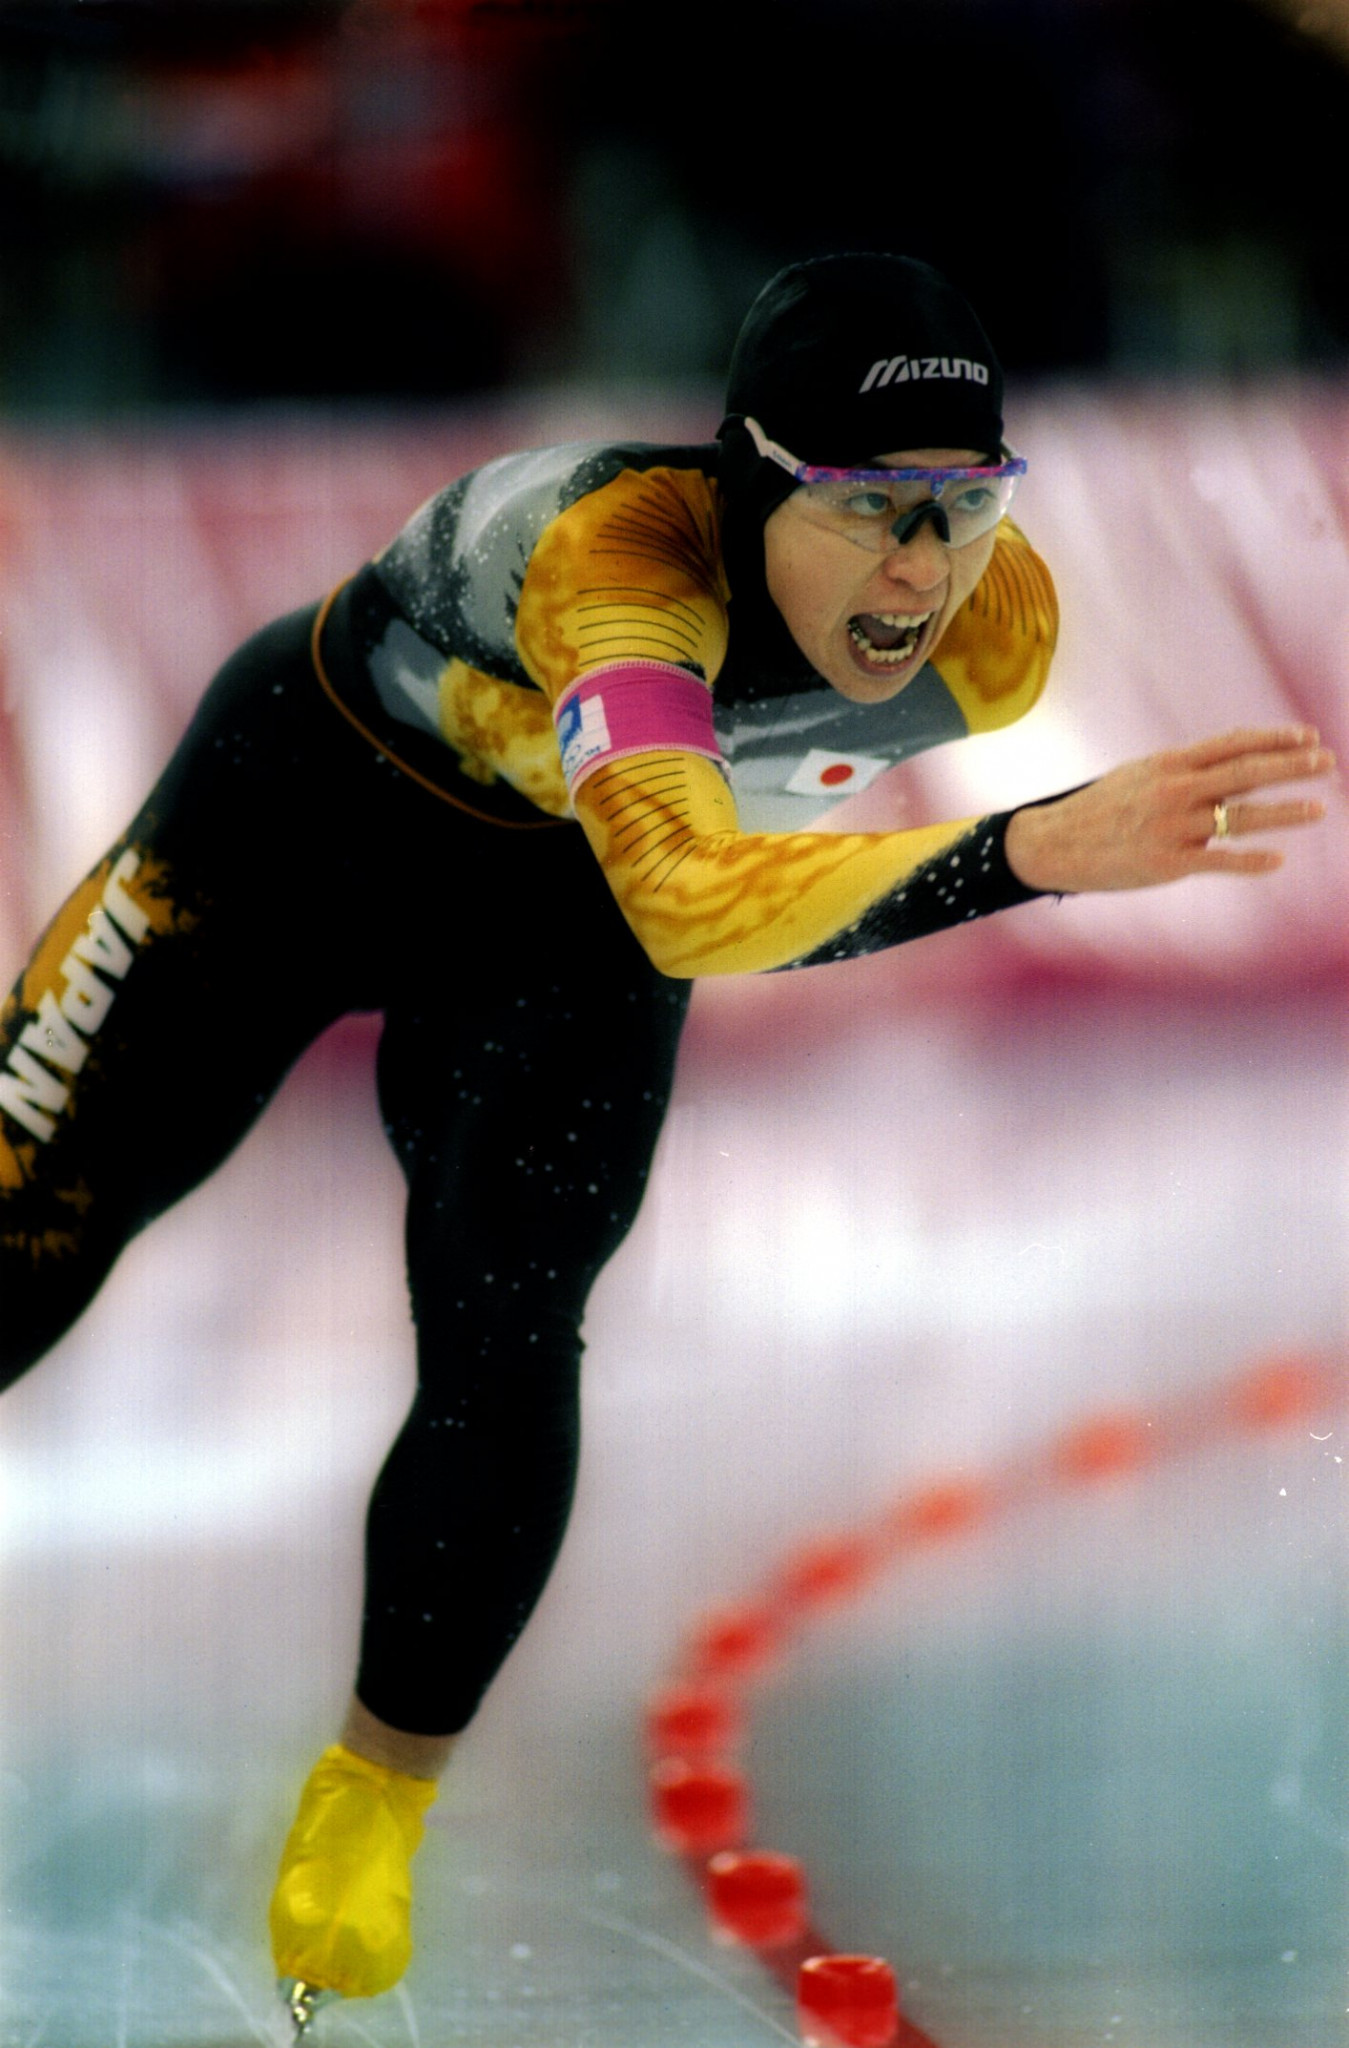 Seiko Hashimoto won an Olympic bronze medal as a speed skater ©Getty Images